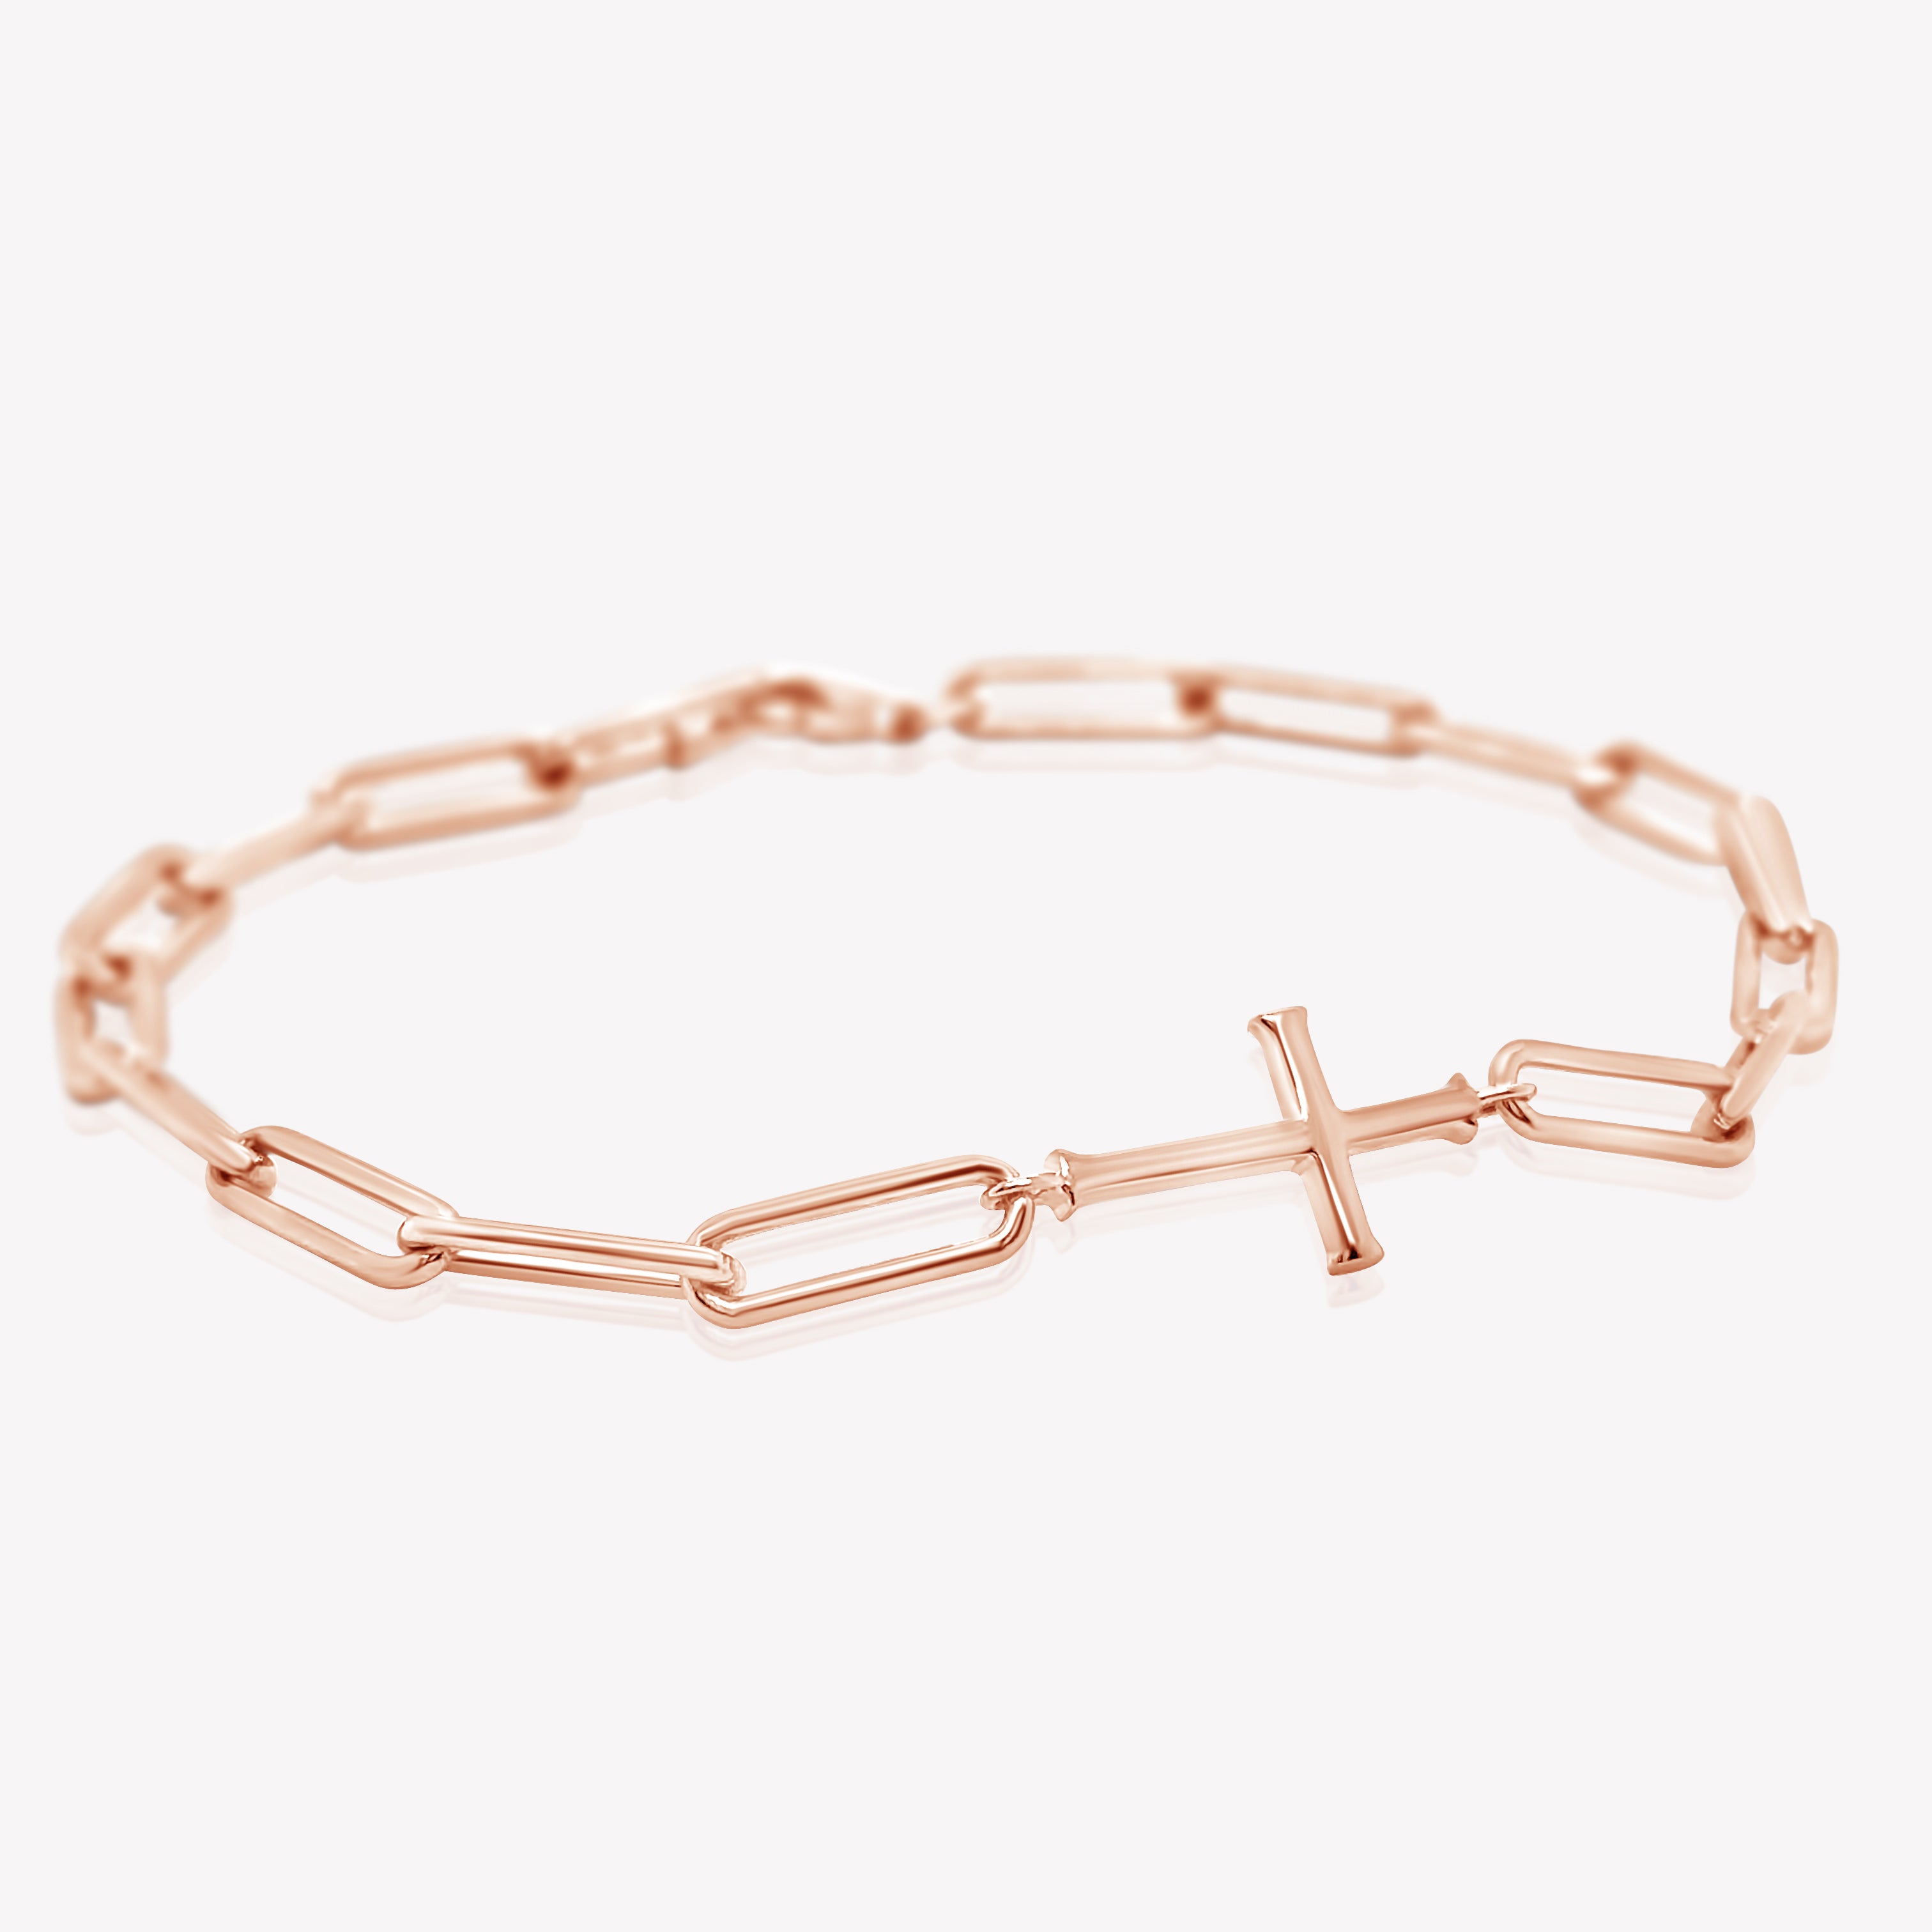 Rizen Jewelry Chain Breaker Bracelet in 18kt rose gold.  Elegant Cross Pendant breaks up the contemporary paper clip link chain with classic lobster clasp  closure, and circular Rizen tag on last link of chain.